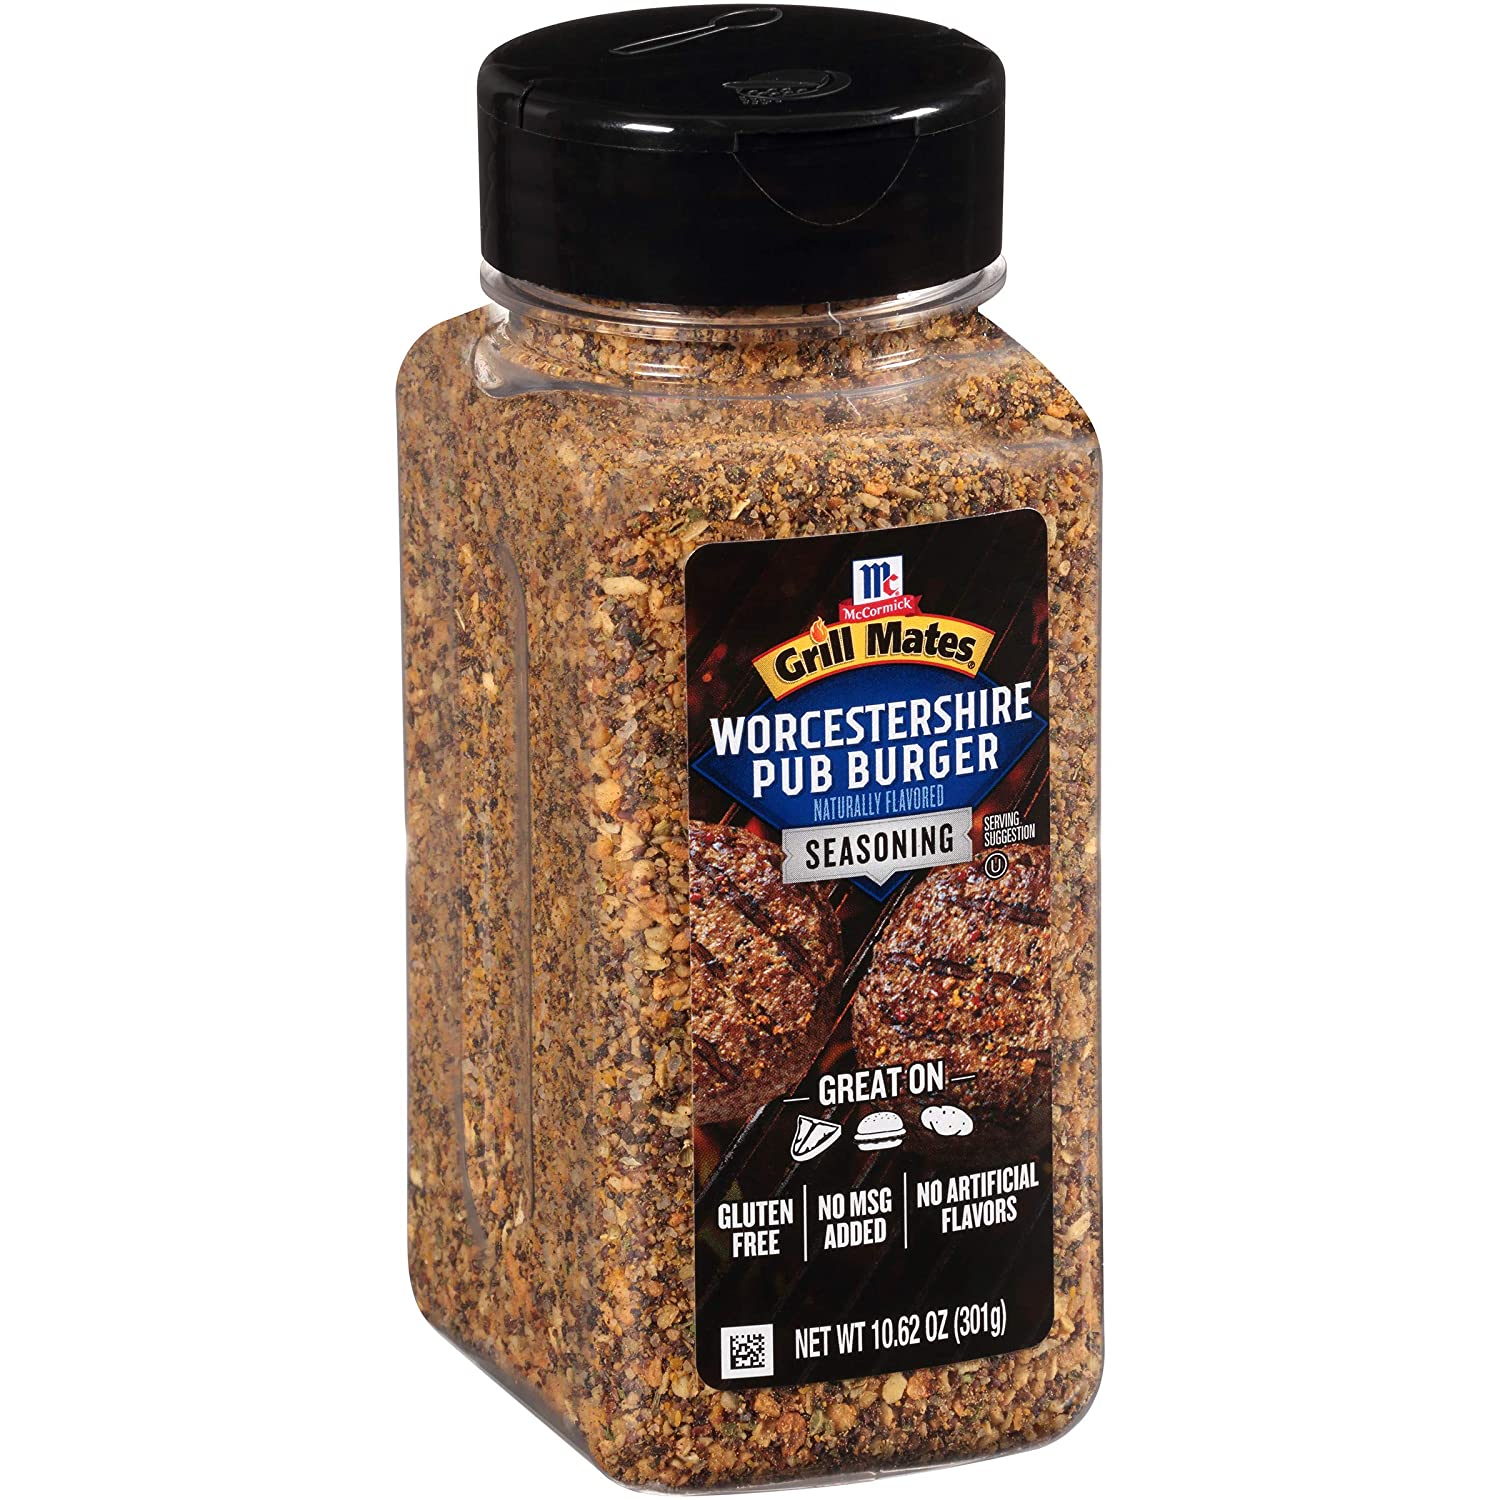 10.62-Oz McCormick Grill Mates Worcestershire Pub Burger Seasoning $5.31 w/ S&S + Free Shipping w/ Prime or on orders over $25